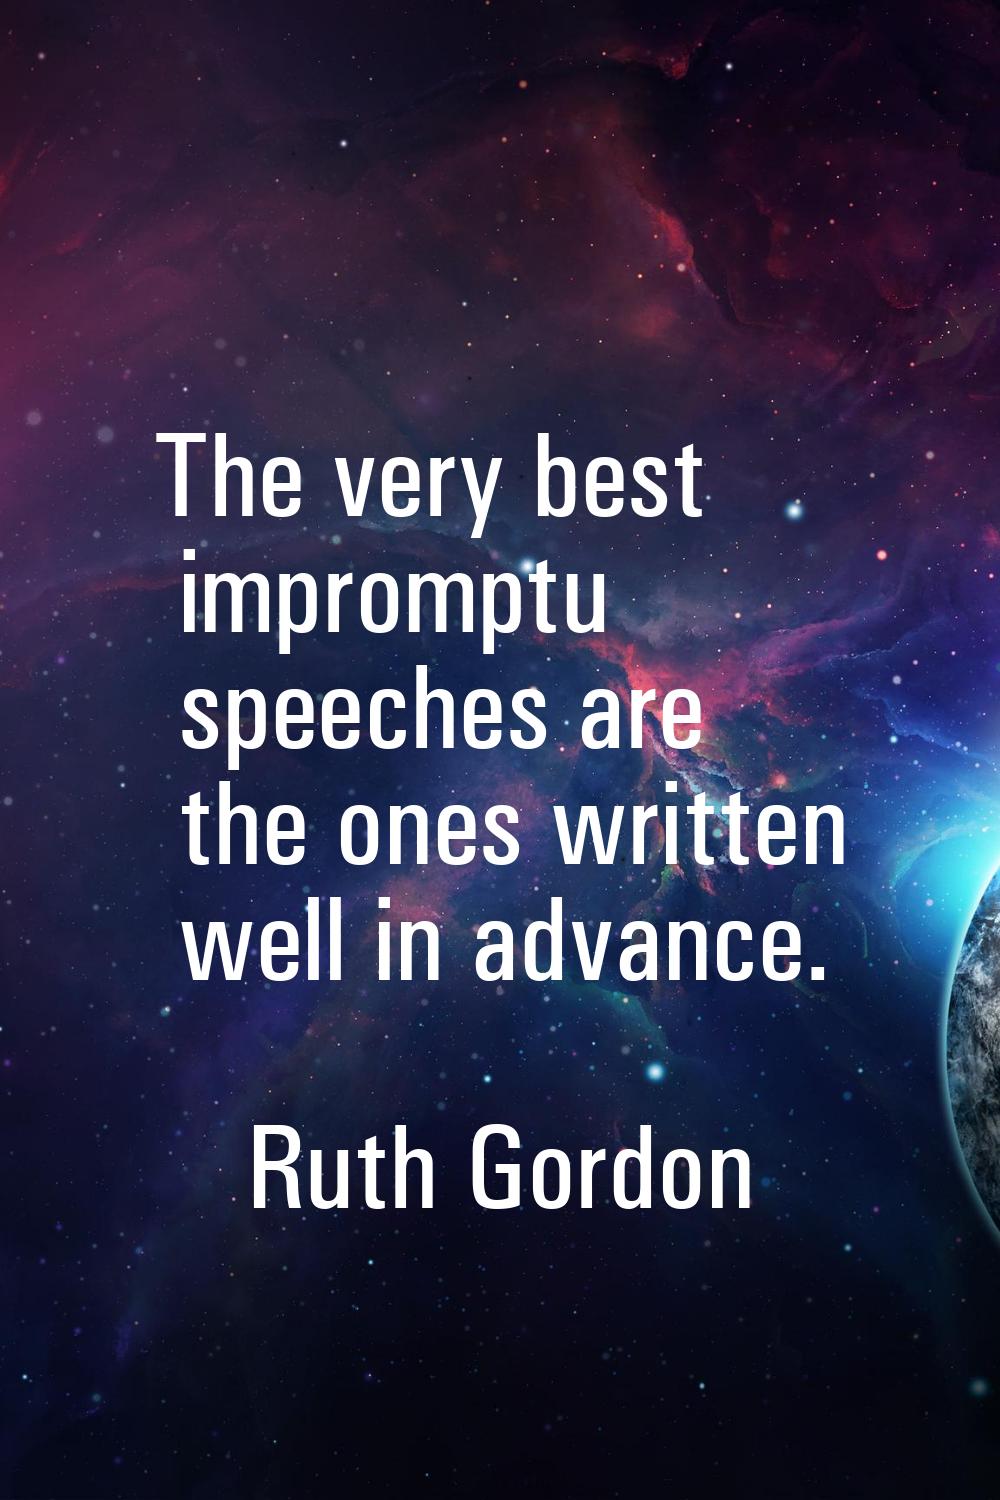 The very best impromptu speeches are the ones written well in advance.